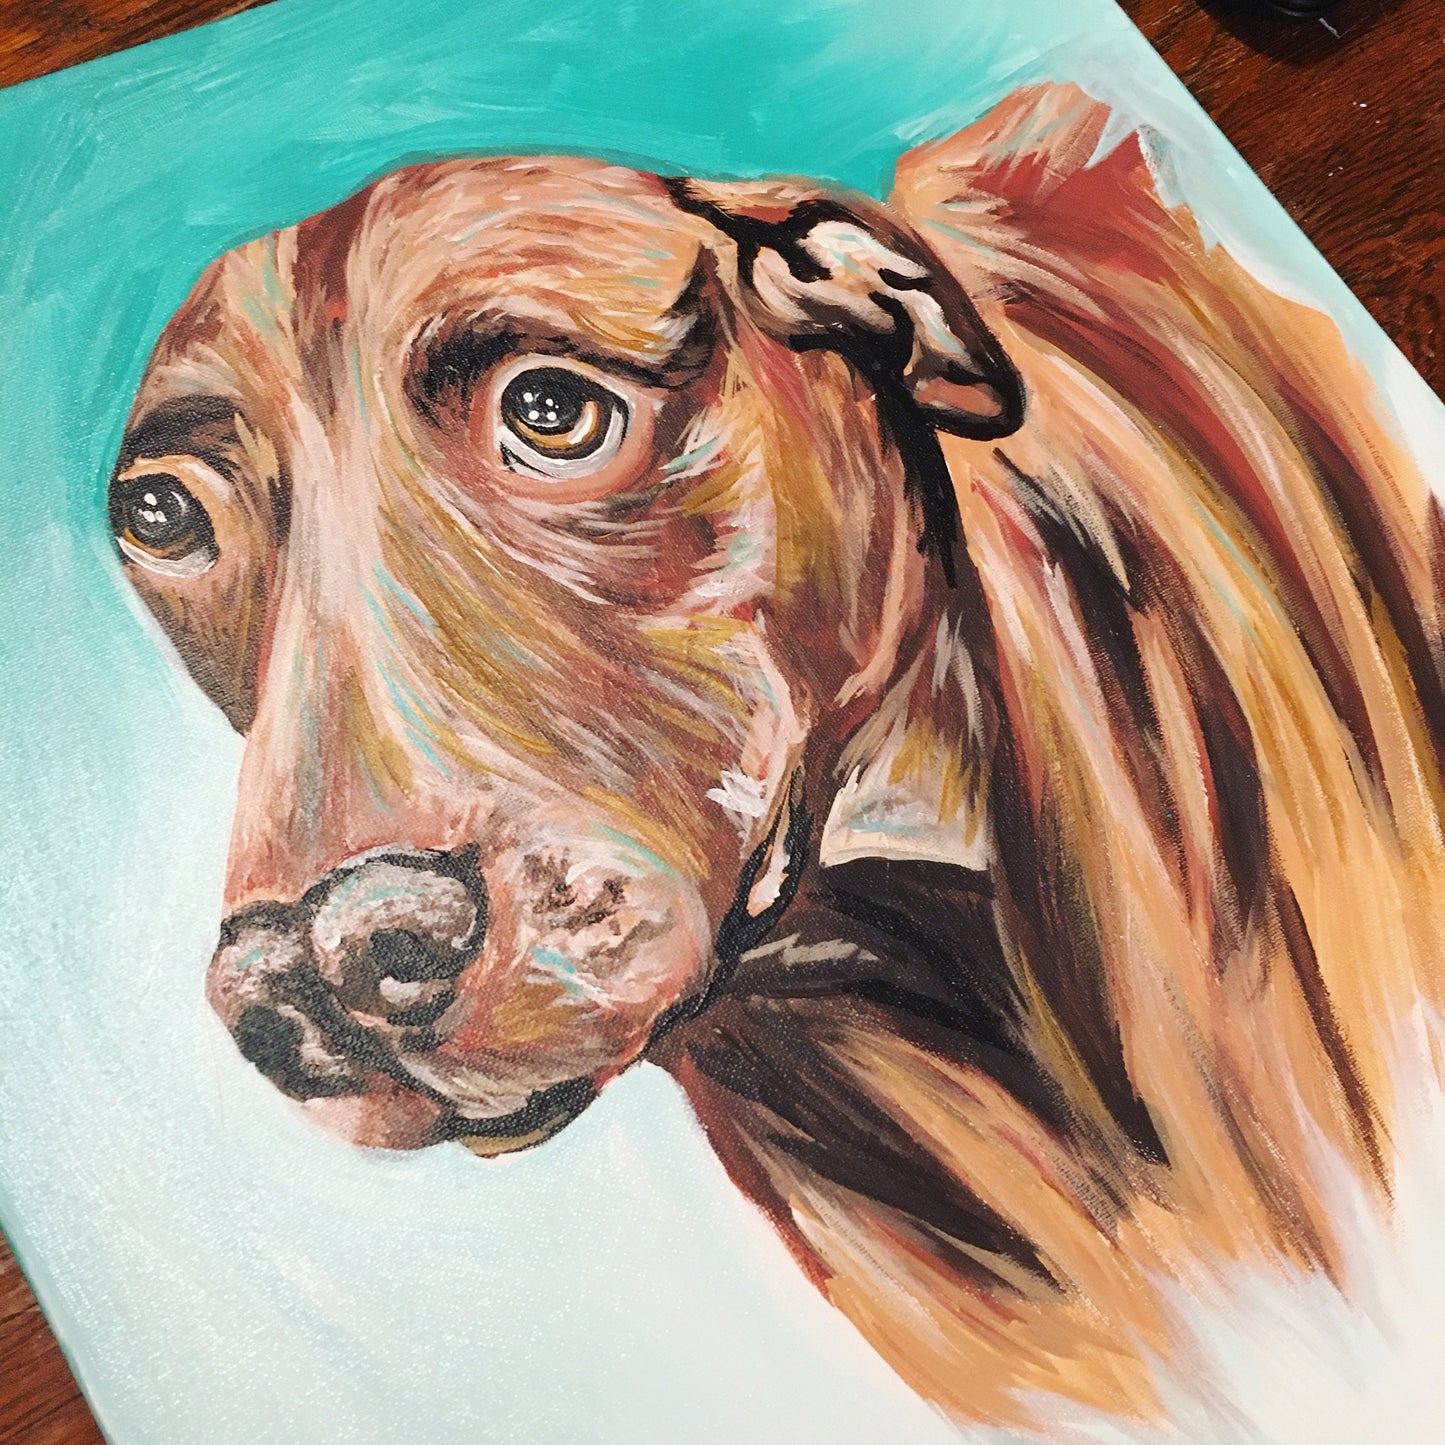 FREE SHIPPING - Personalized Pet Portrait